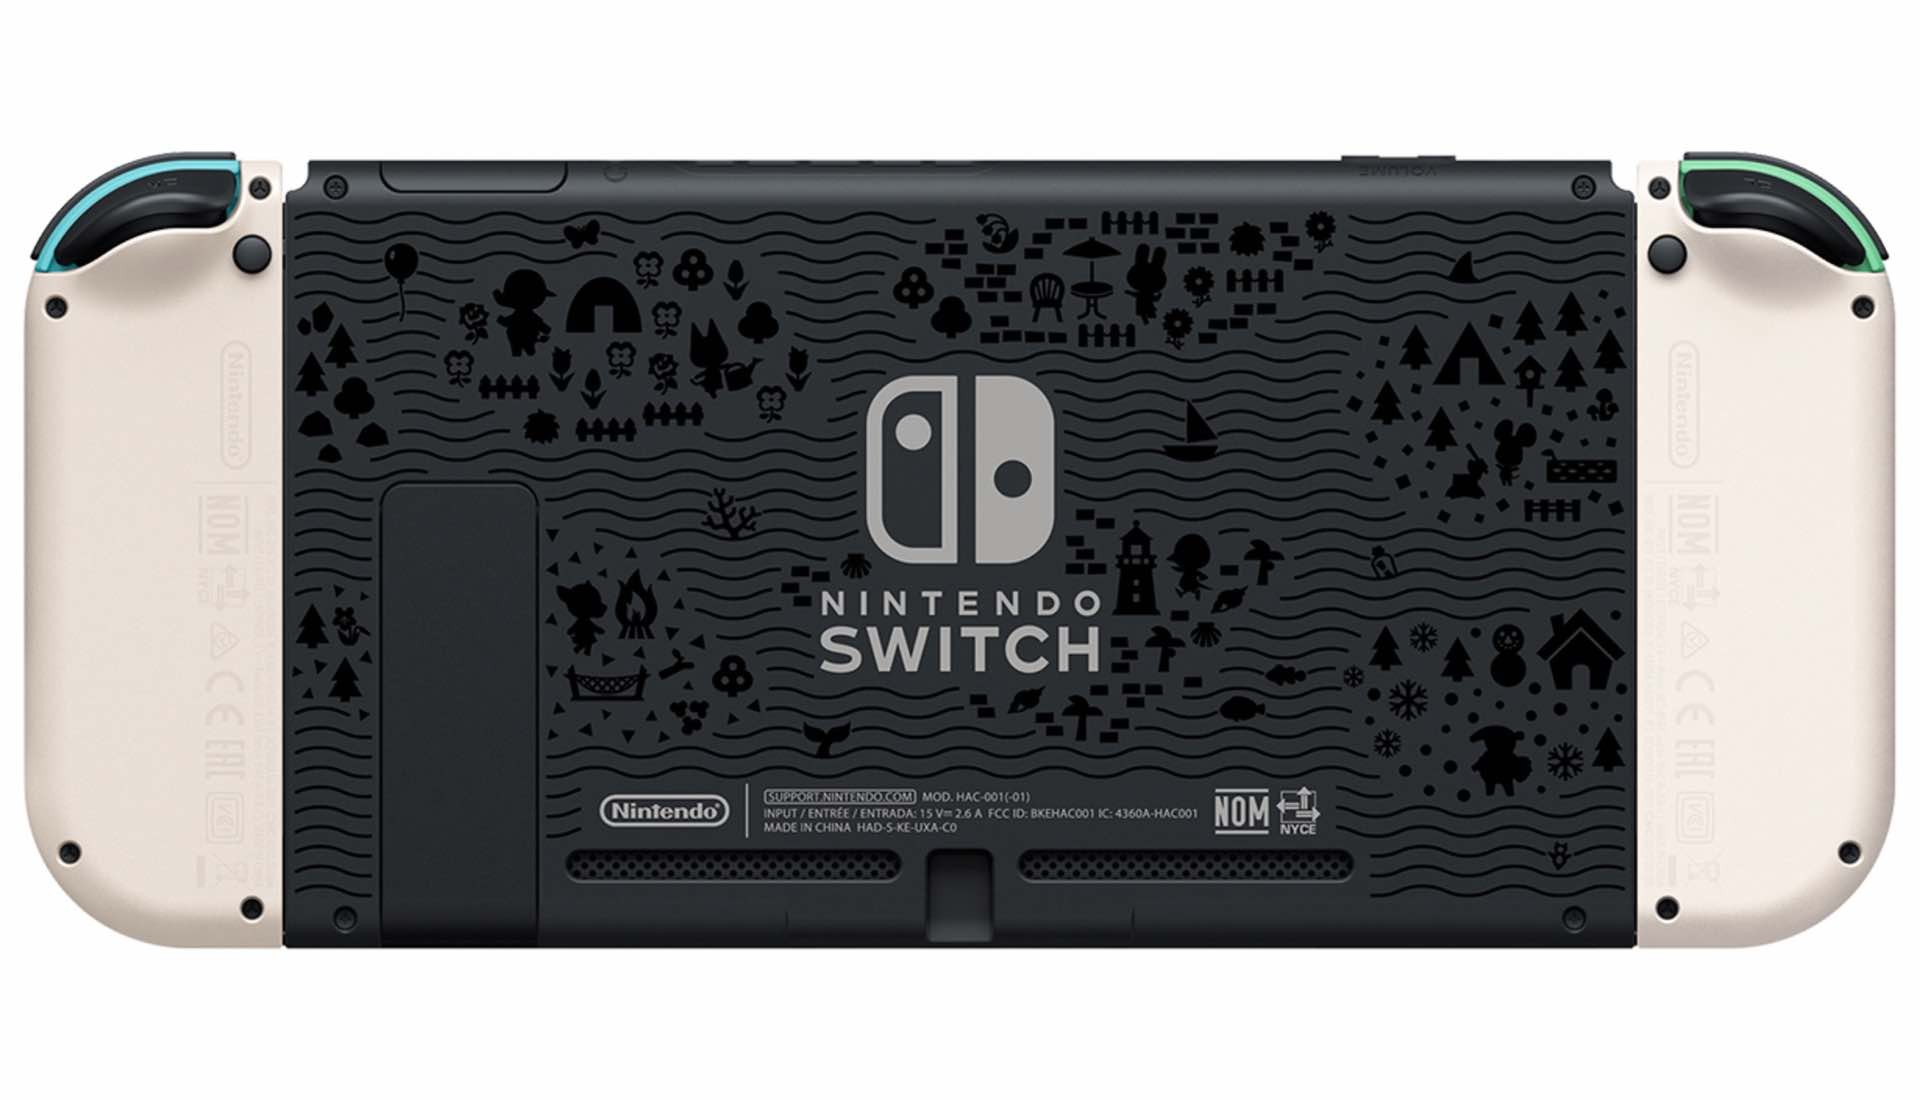 nintendo-switch-animal-crossing-new-horizons-edition-back-in-stock-back-design